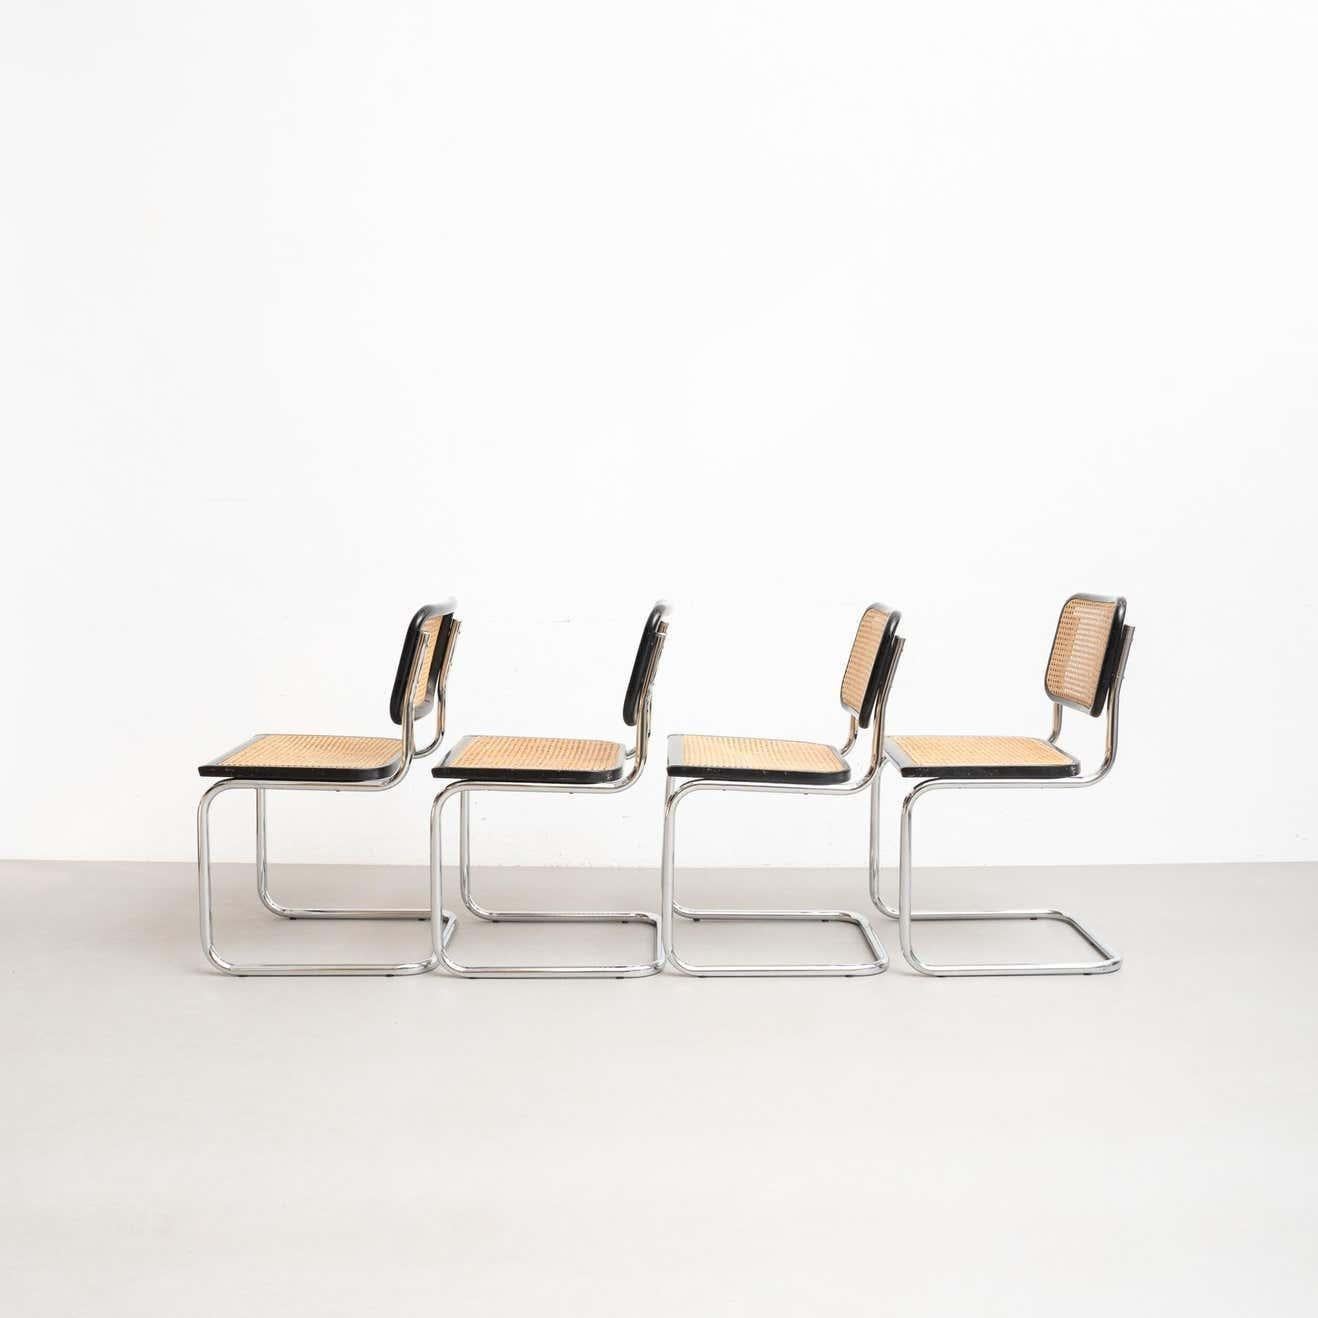 Set of 4 Marcel Breuer Cesca Metal and Wood Mid-Century Modern Chairs, c 1960 For Sale 2